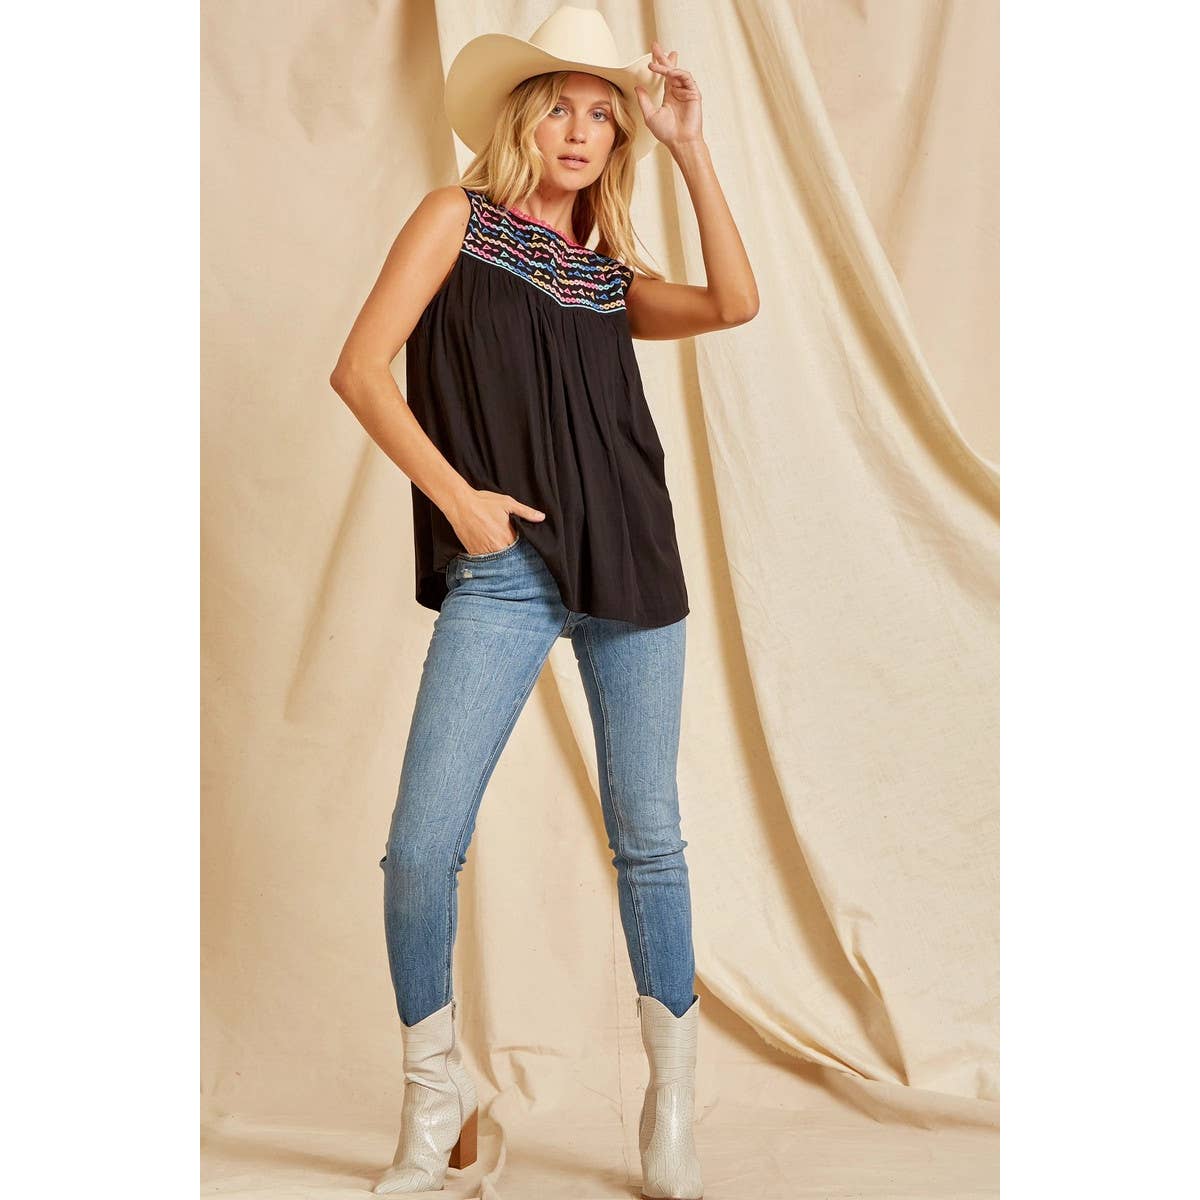 Black Woven Embroidered Tunic Top